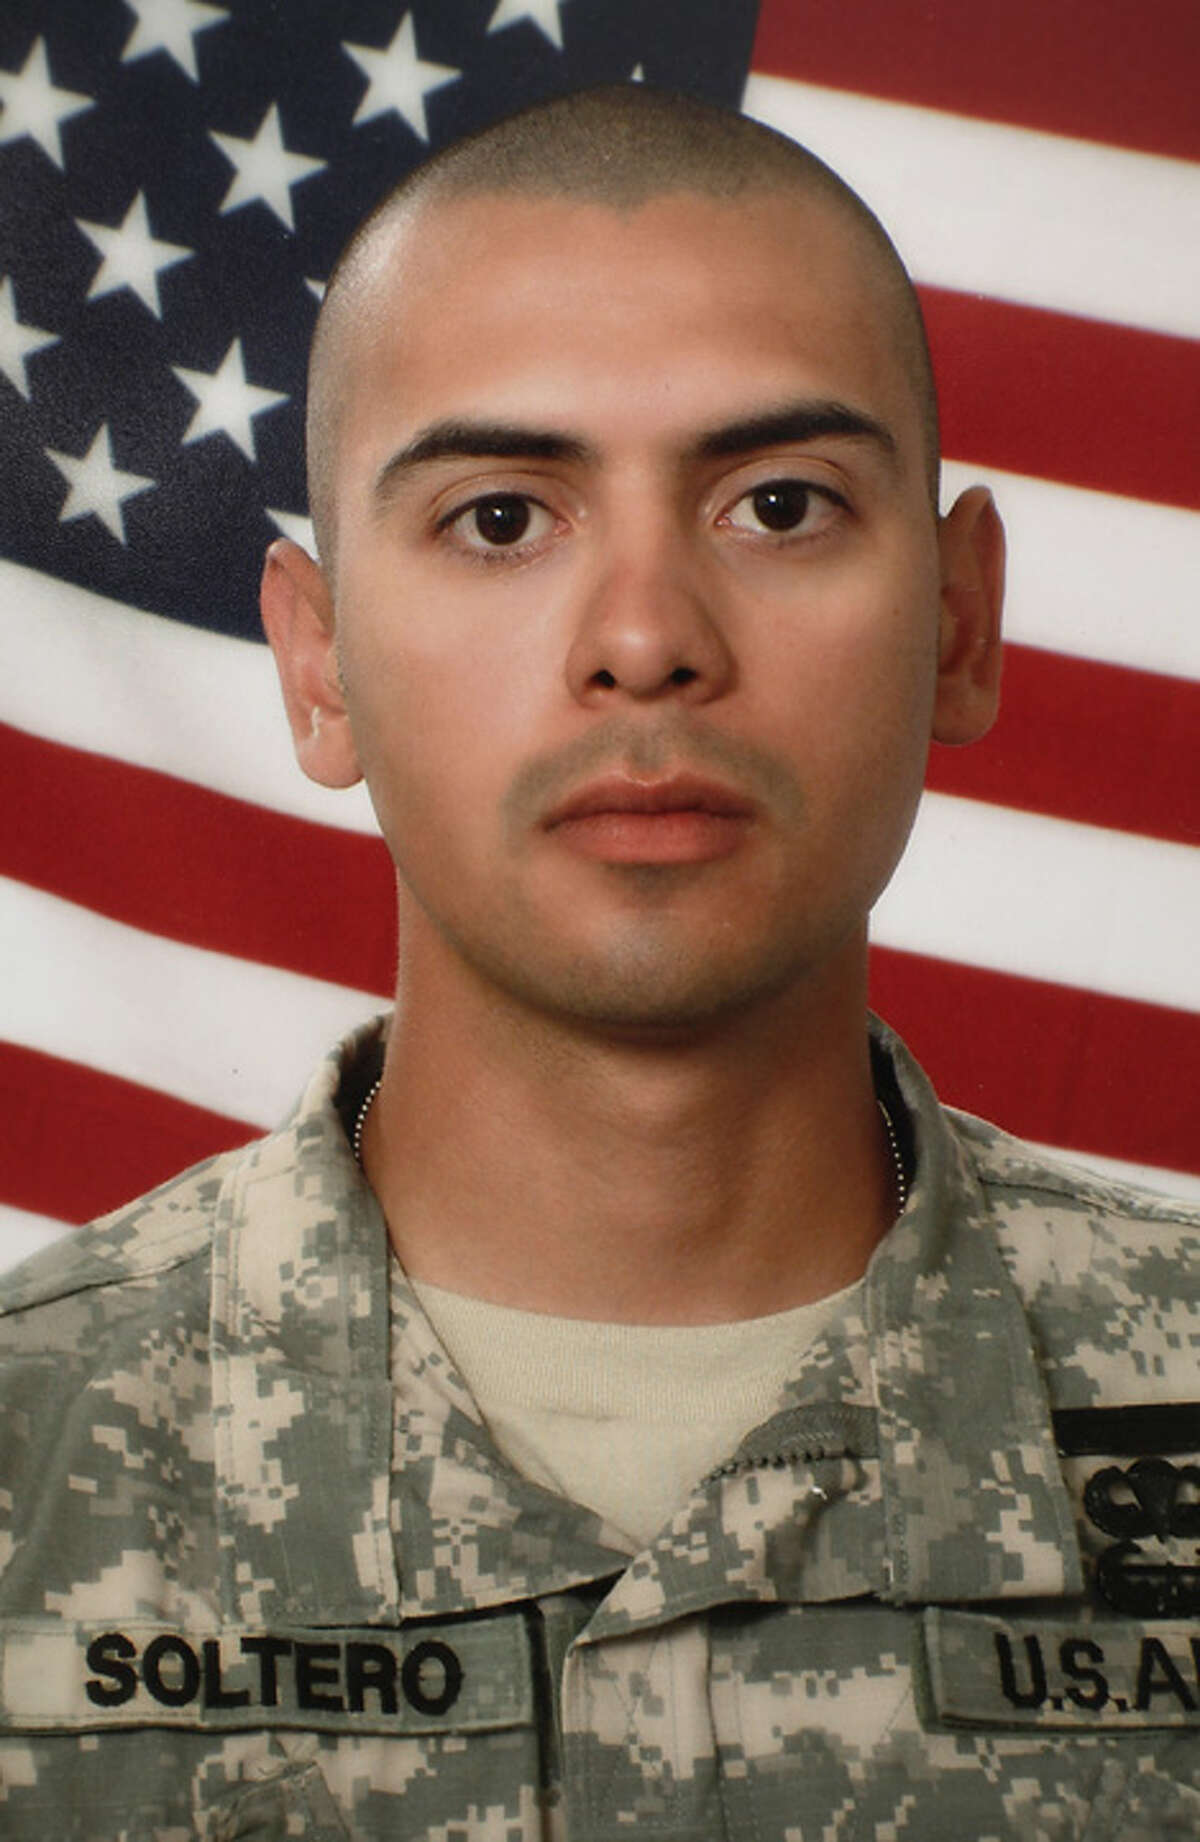 Spc. Omar Soltero: "He wanted to fight the bad guys," his father said.